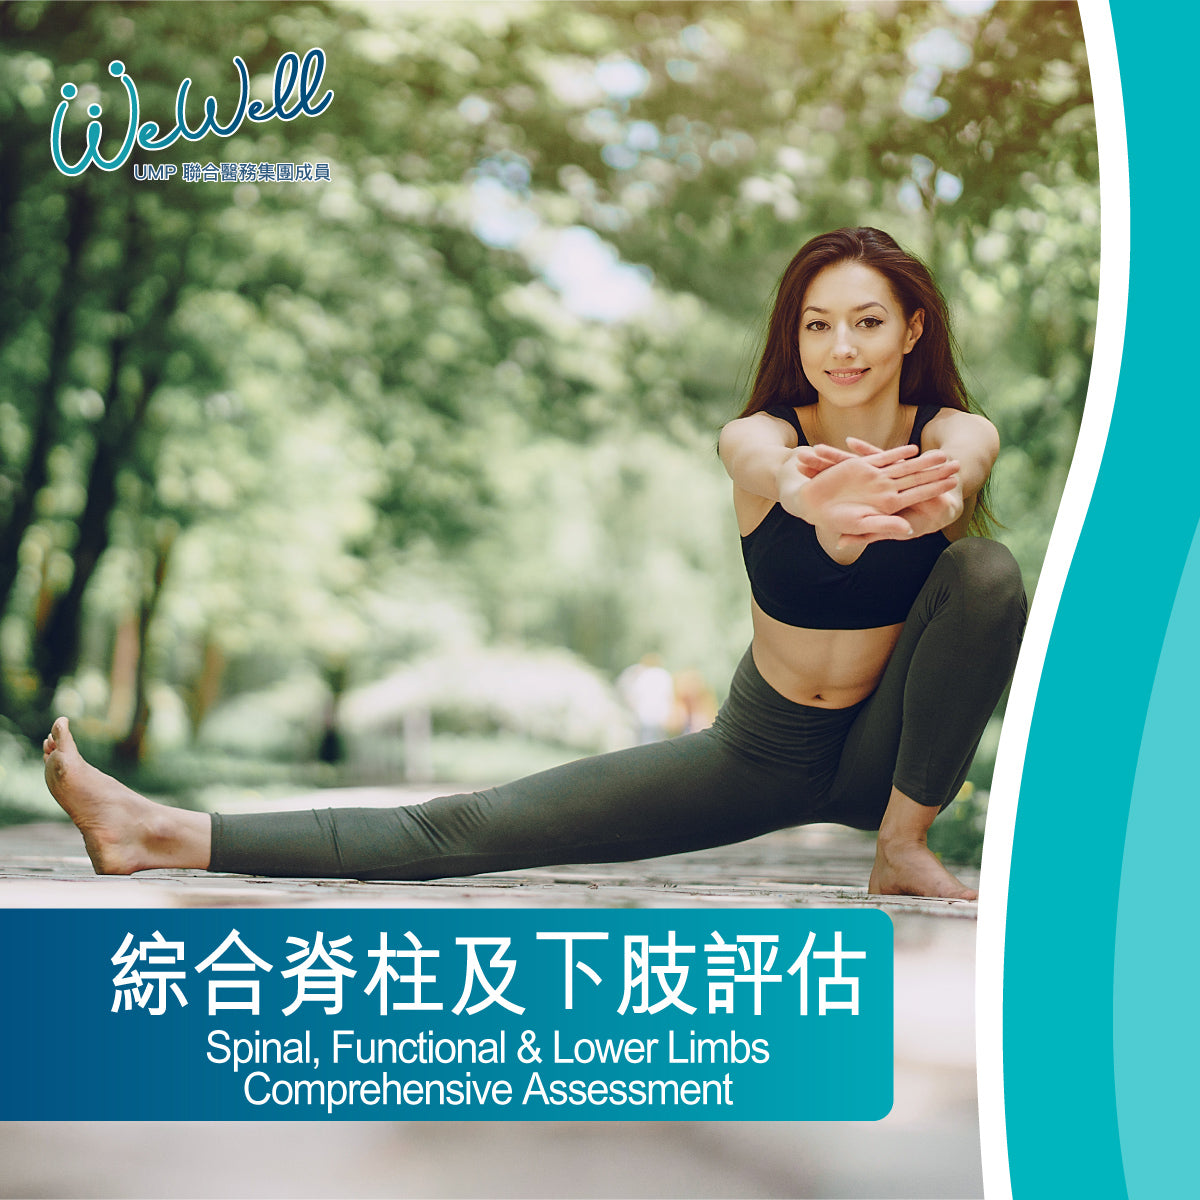 Spinal, Functional & Lower Limbs Comprehensive Assessment (SCH-PHY-00027)